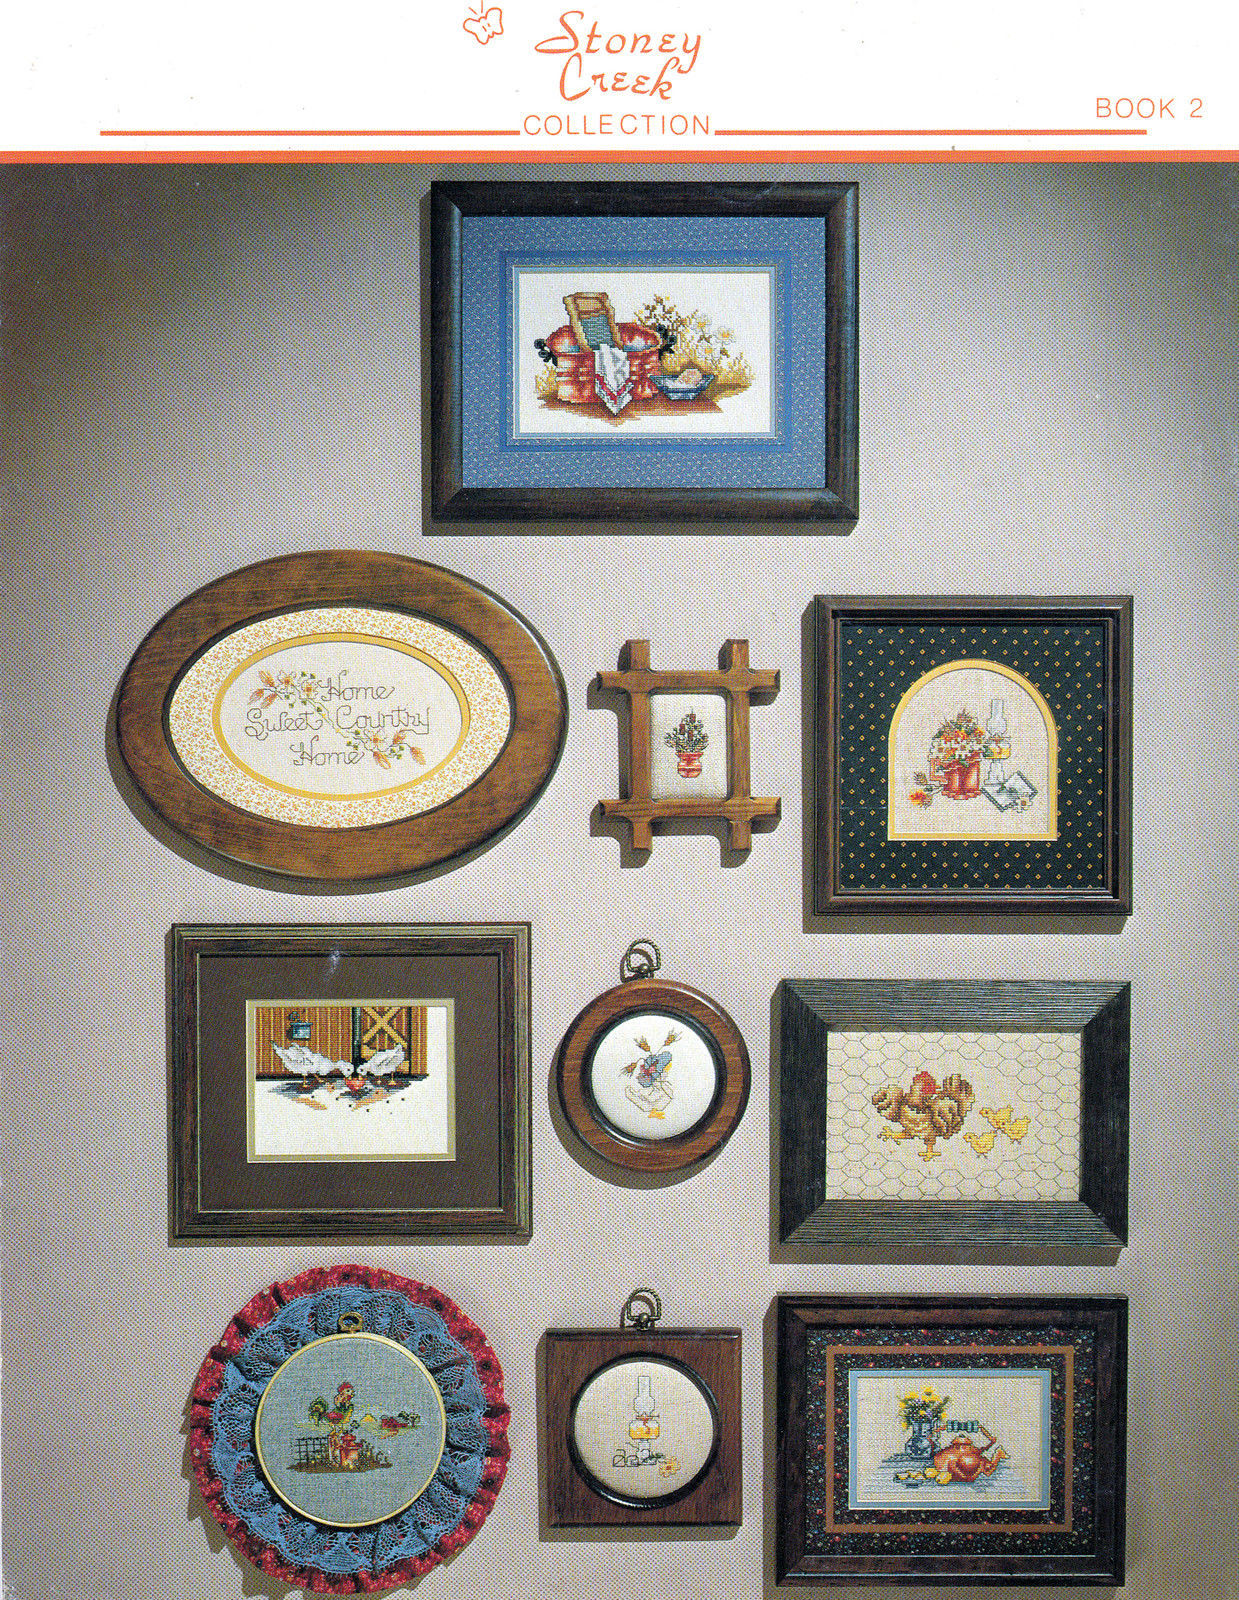 Primary image for CROSS STITCH COPPER COUNTRY VARIETY STONEY CREEK 1984 BOOK 2